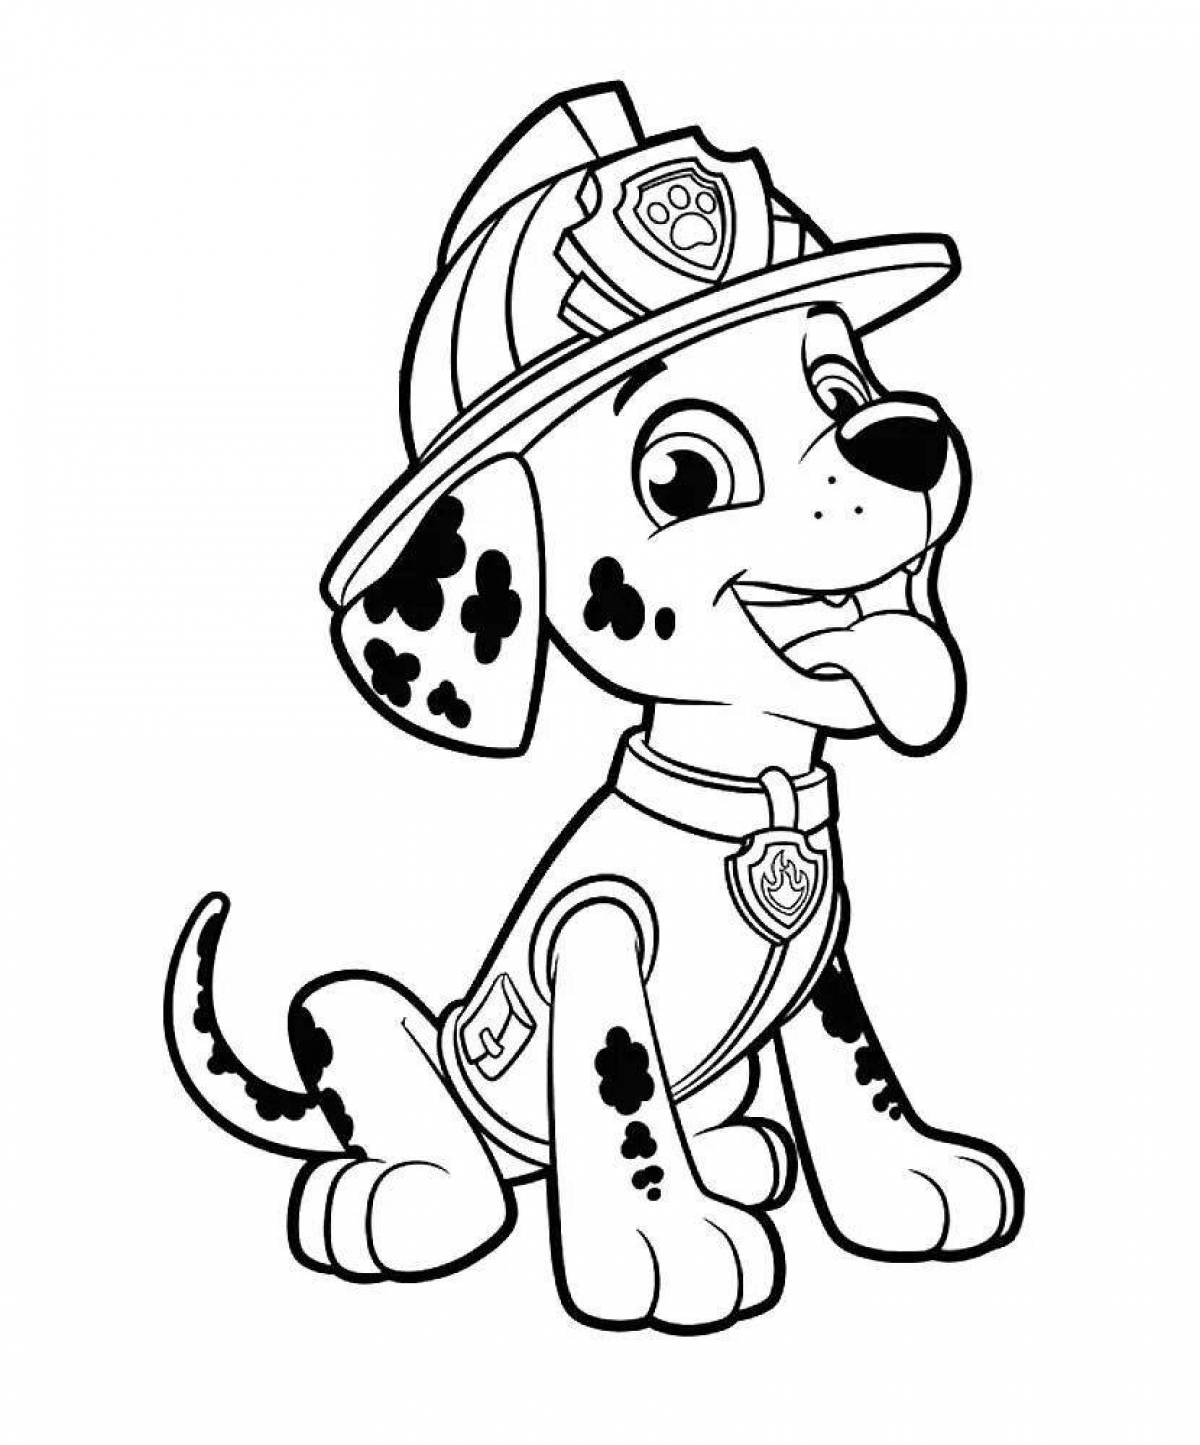 Animated fire dog coloring page